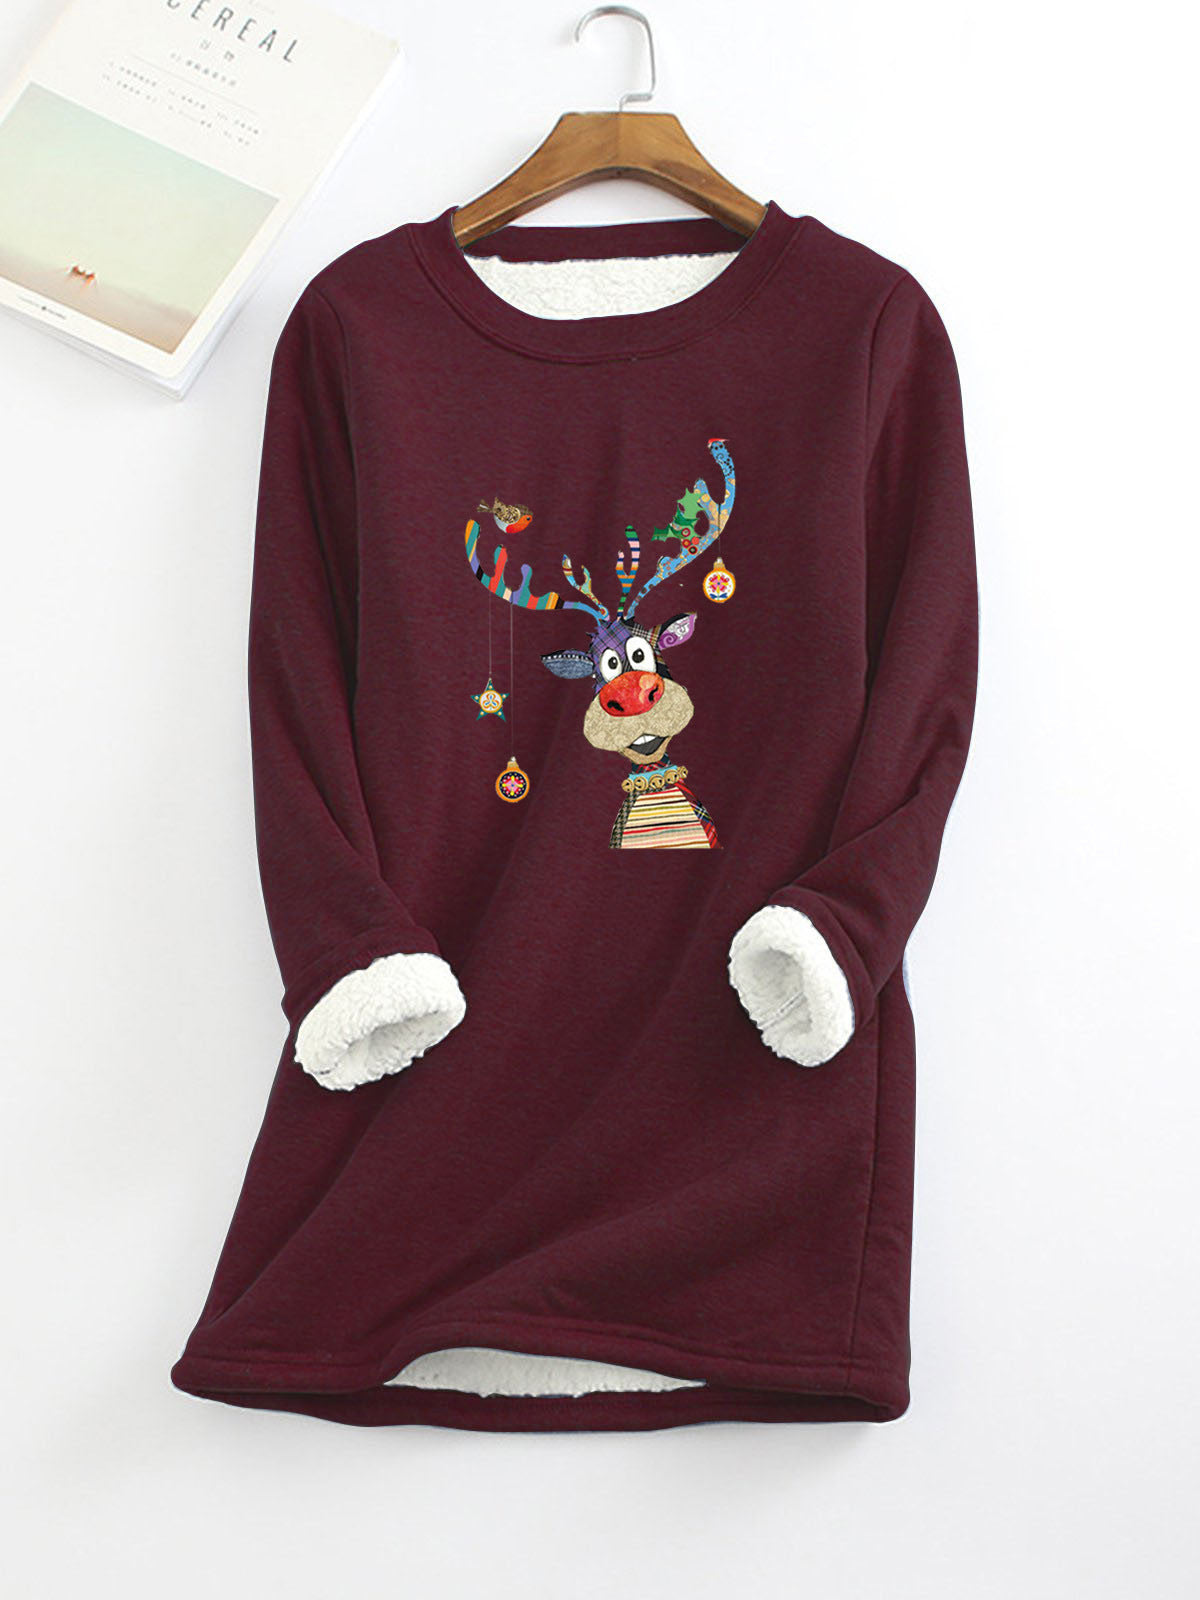 Winter Thickened Warm Base Layer with Christmas Element Printed Women's Sweatshirt